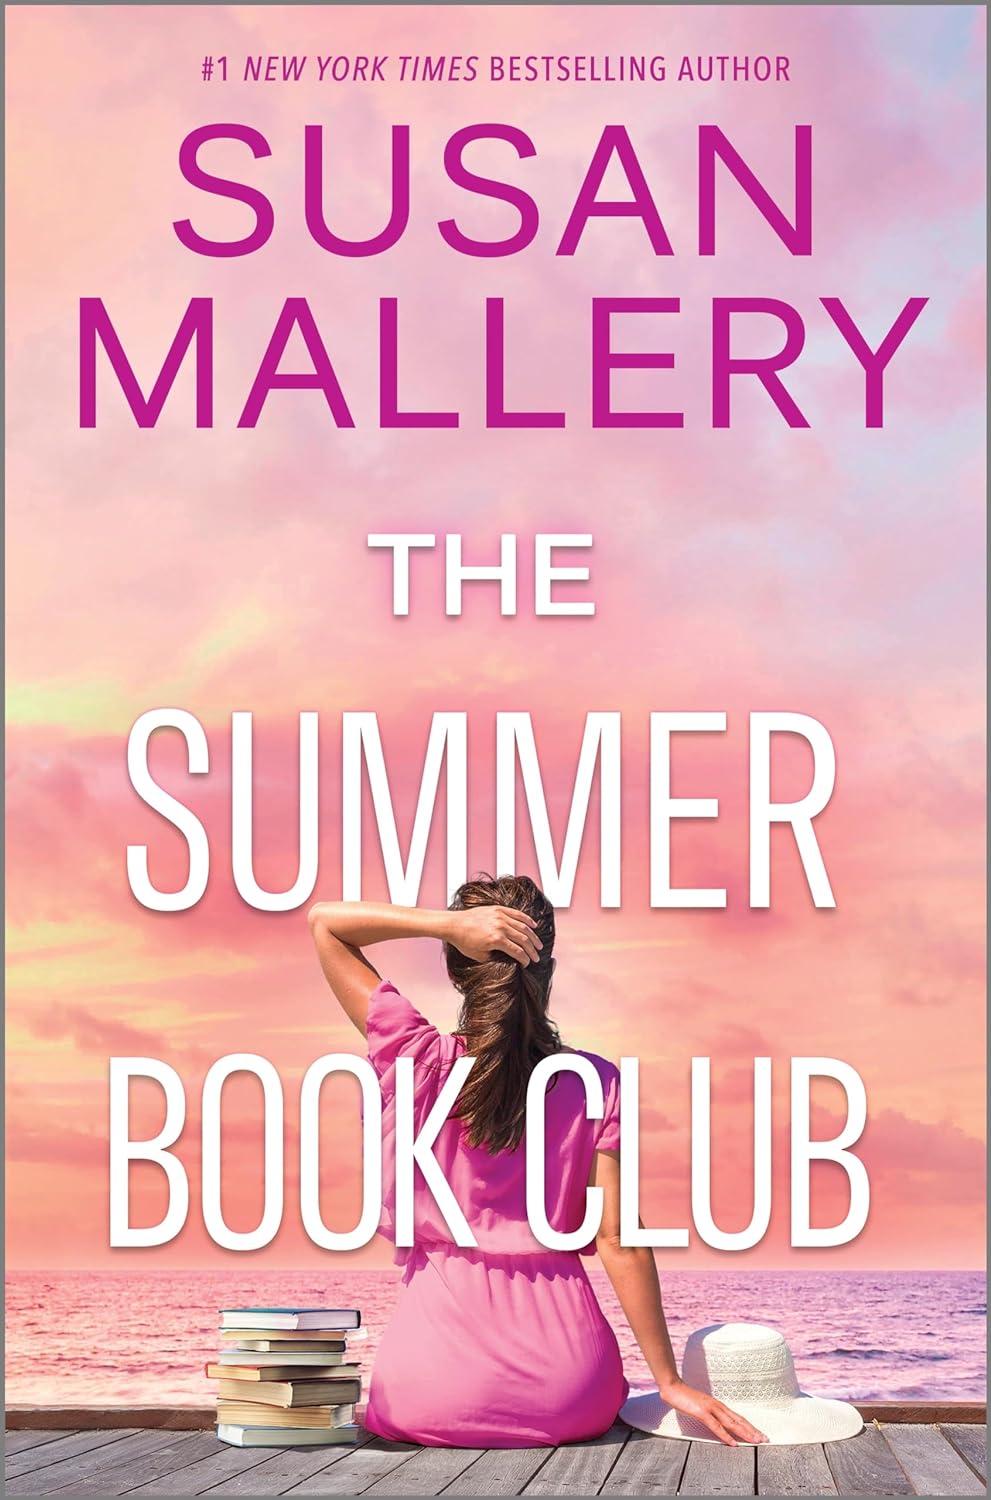 Image for "The Summer Book Club"